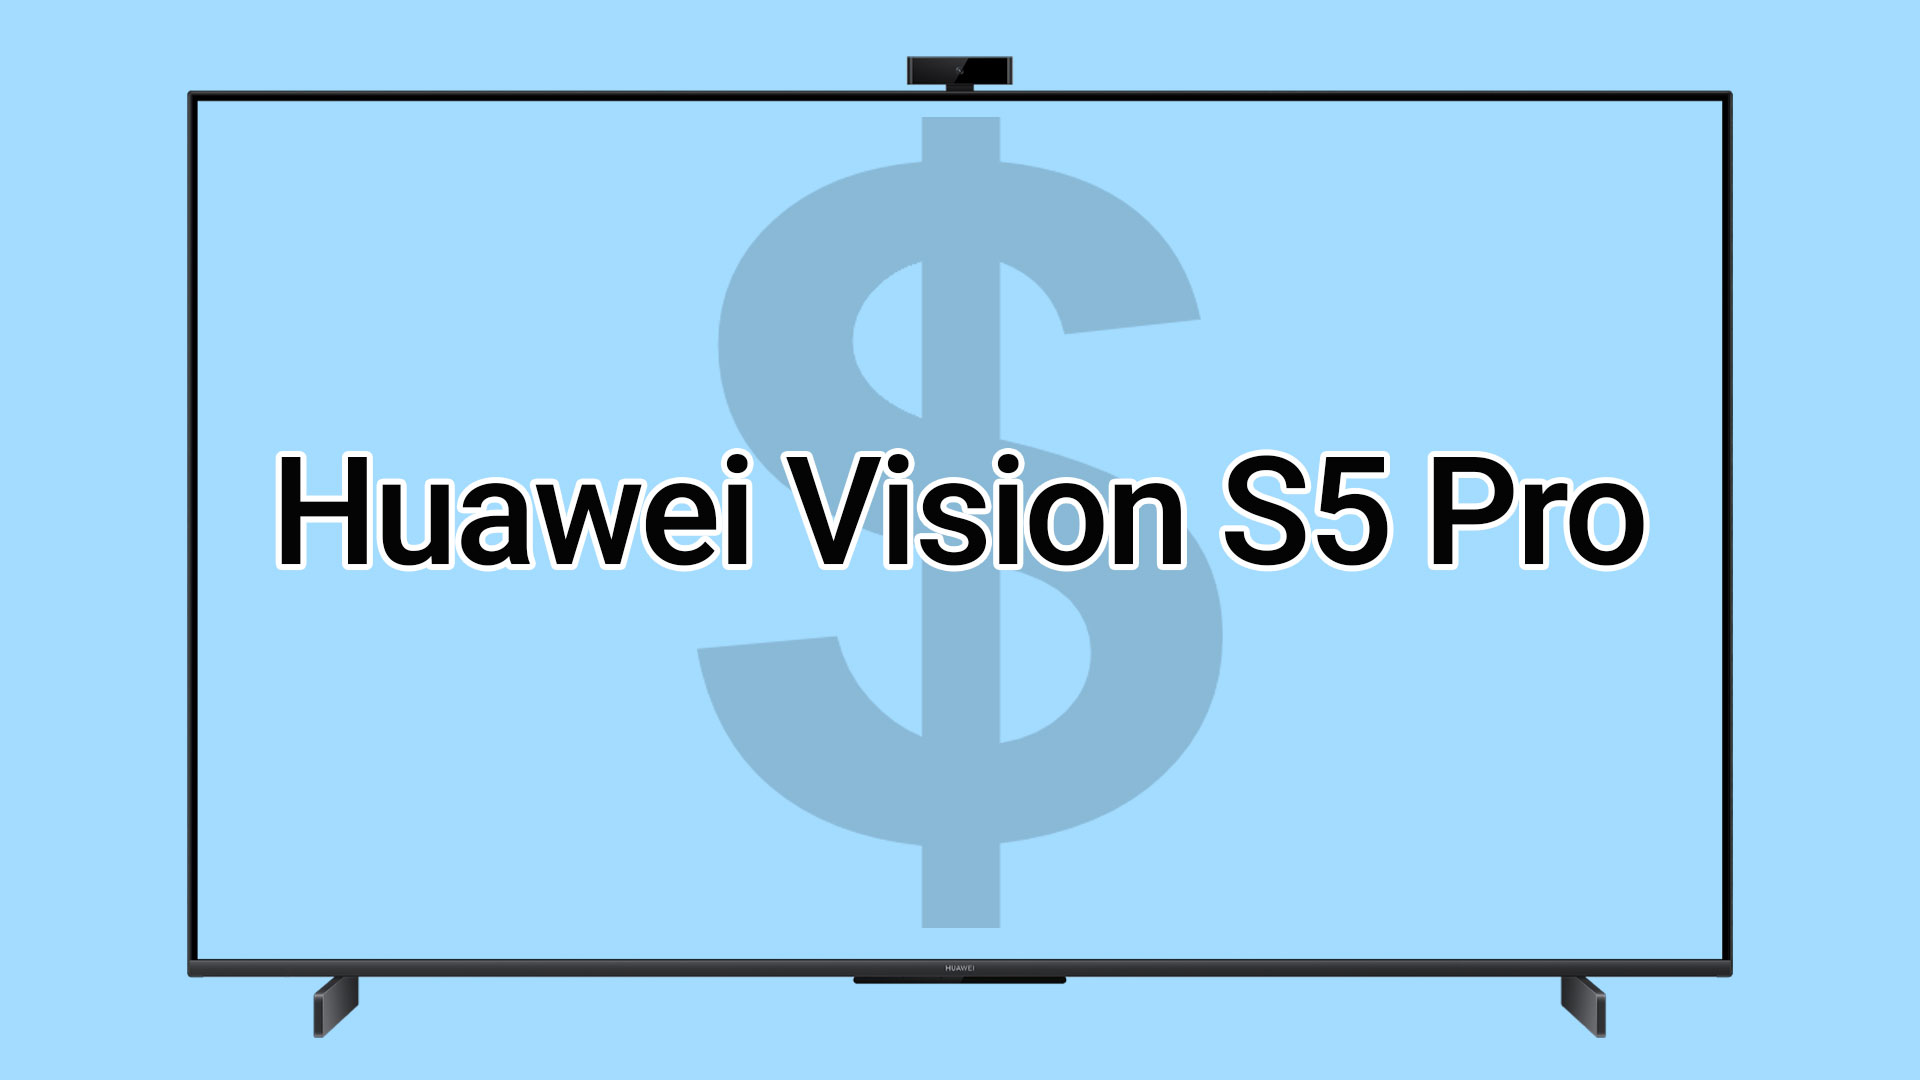 Huawei Vision S5 Pro